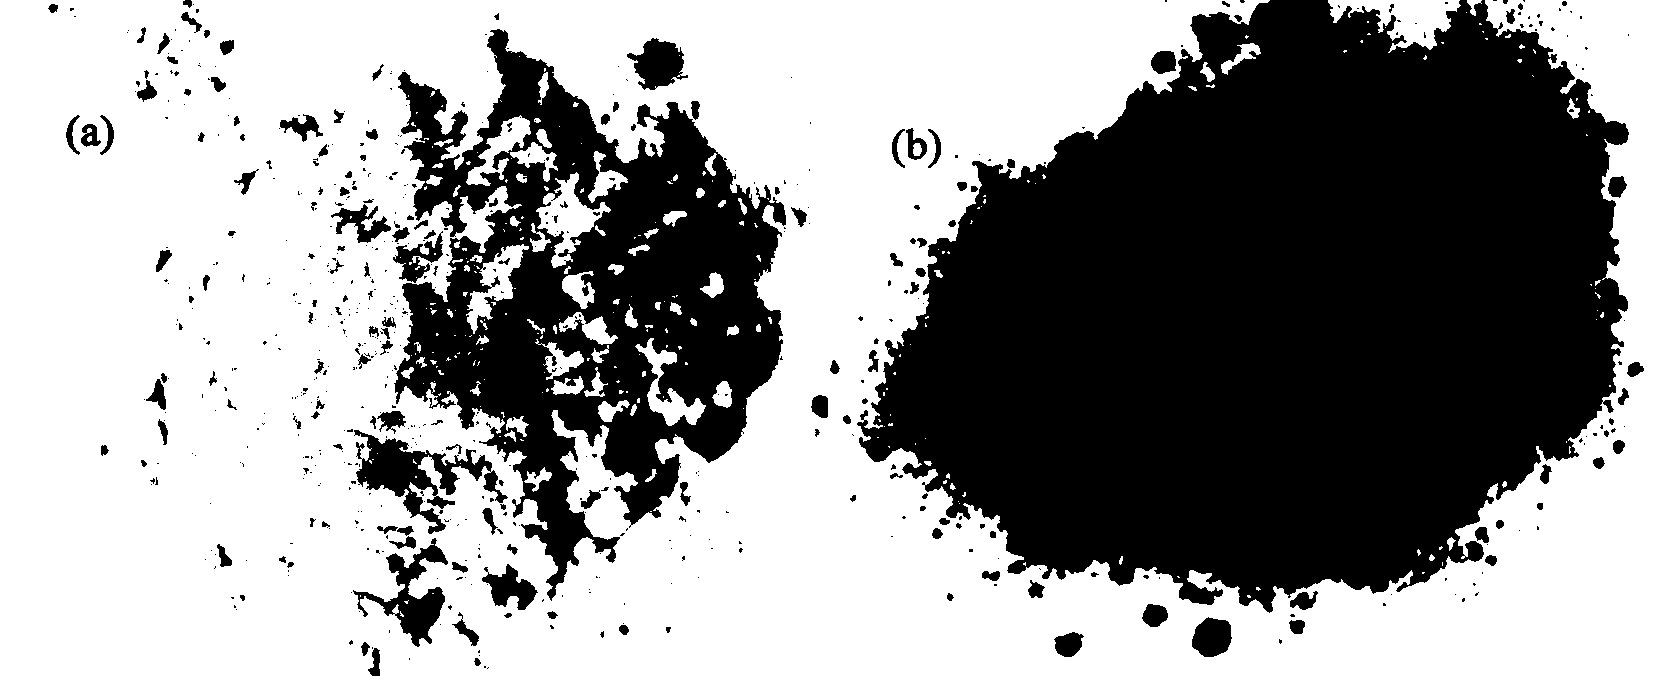 Method for preparing palm oil decolorizing agent by attapulgite clay soybean oil decolorized waste residues